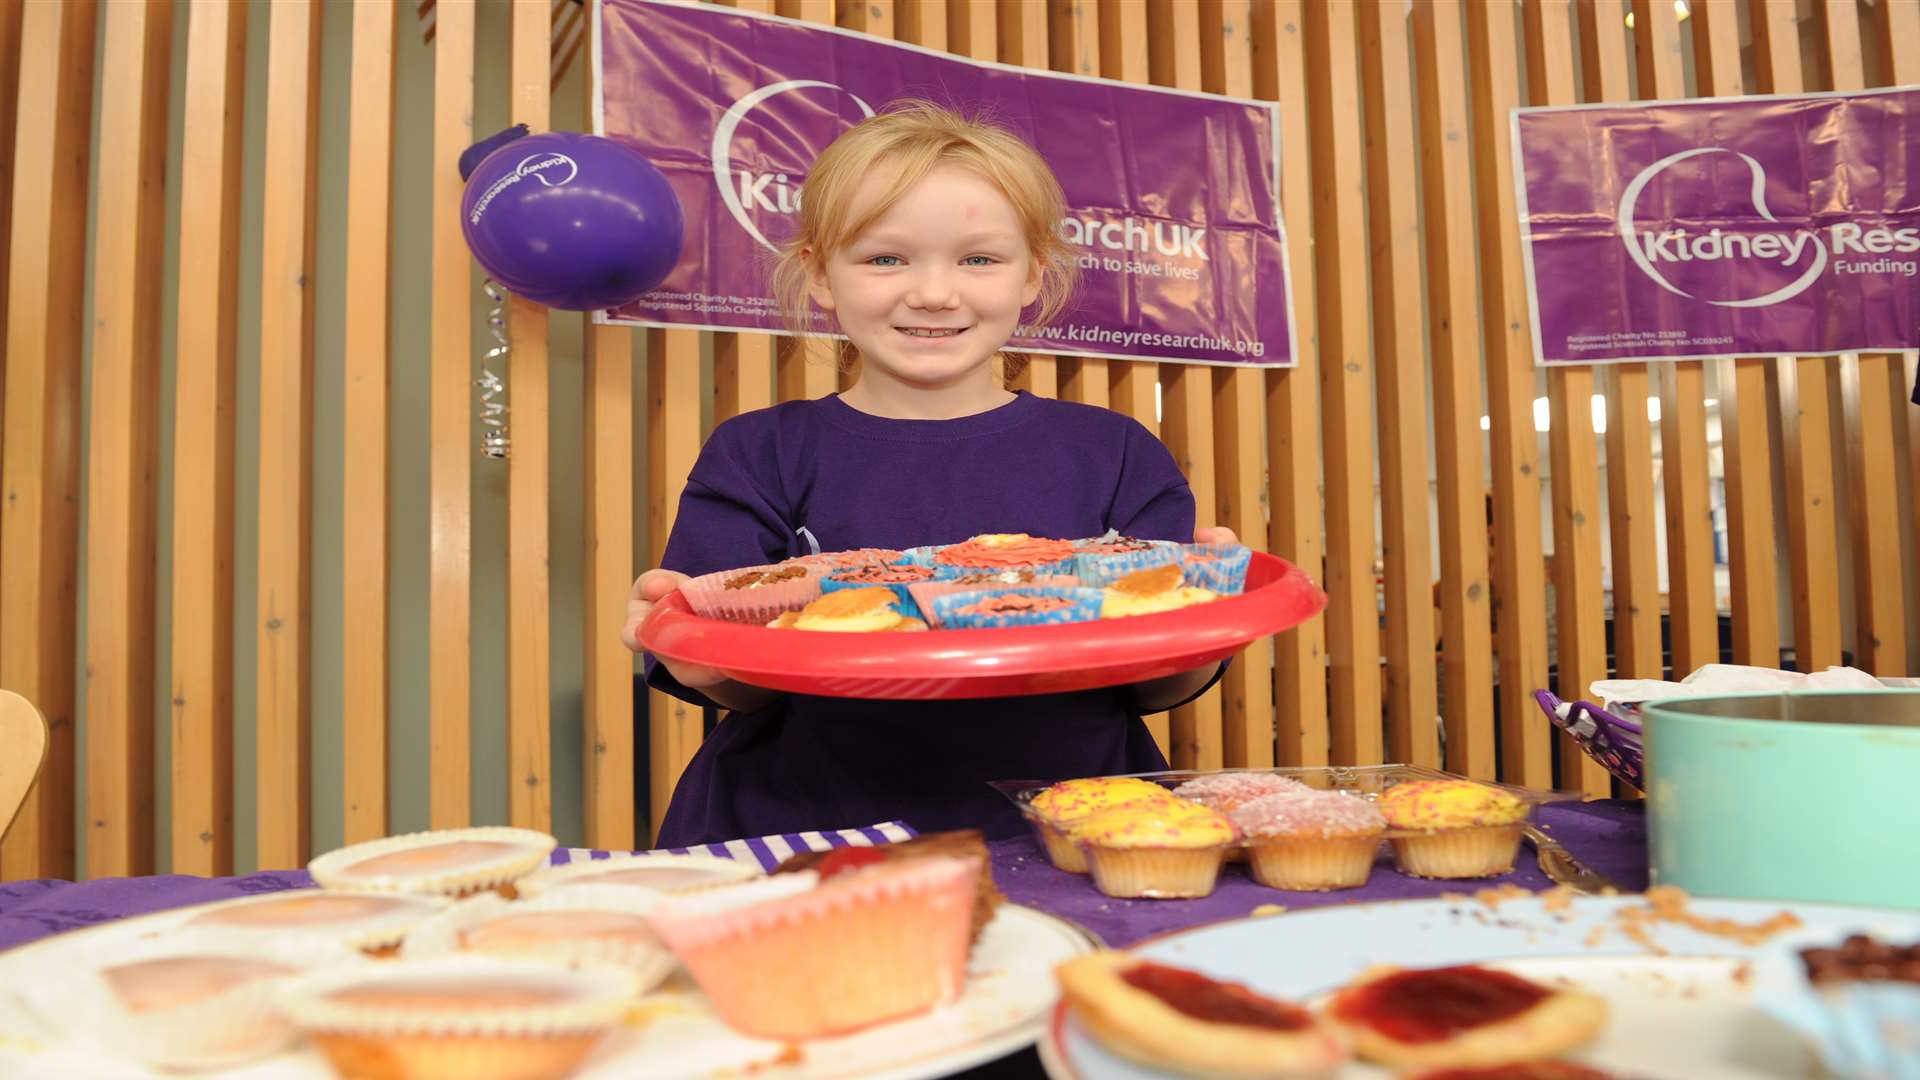 Chloe Heale, nine, sold cakes at Medway Maritime Hospital to raise money for Kidney Research